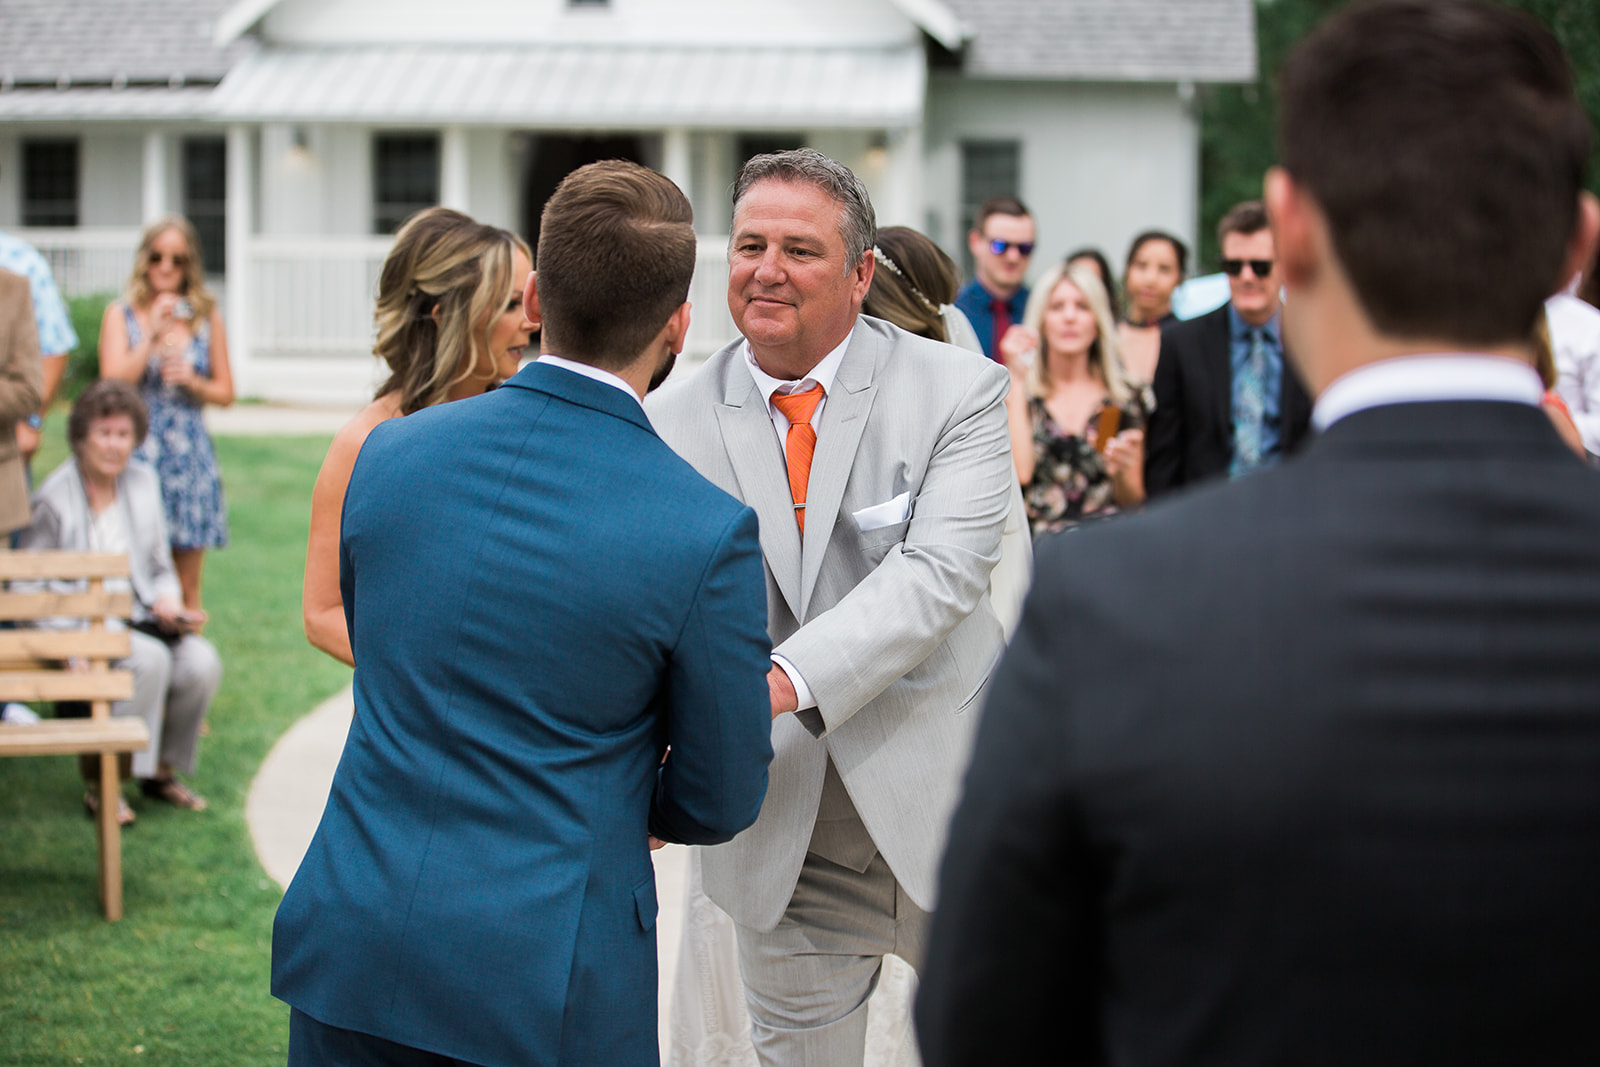 father of the bride shaking groom's hand